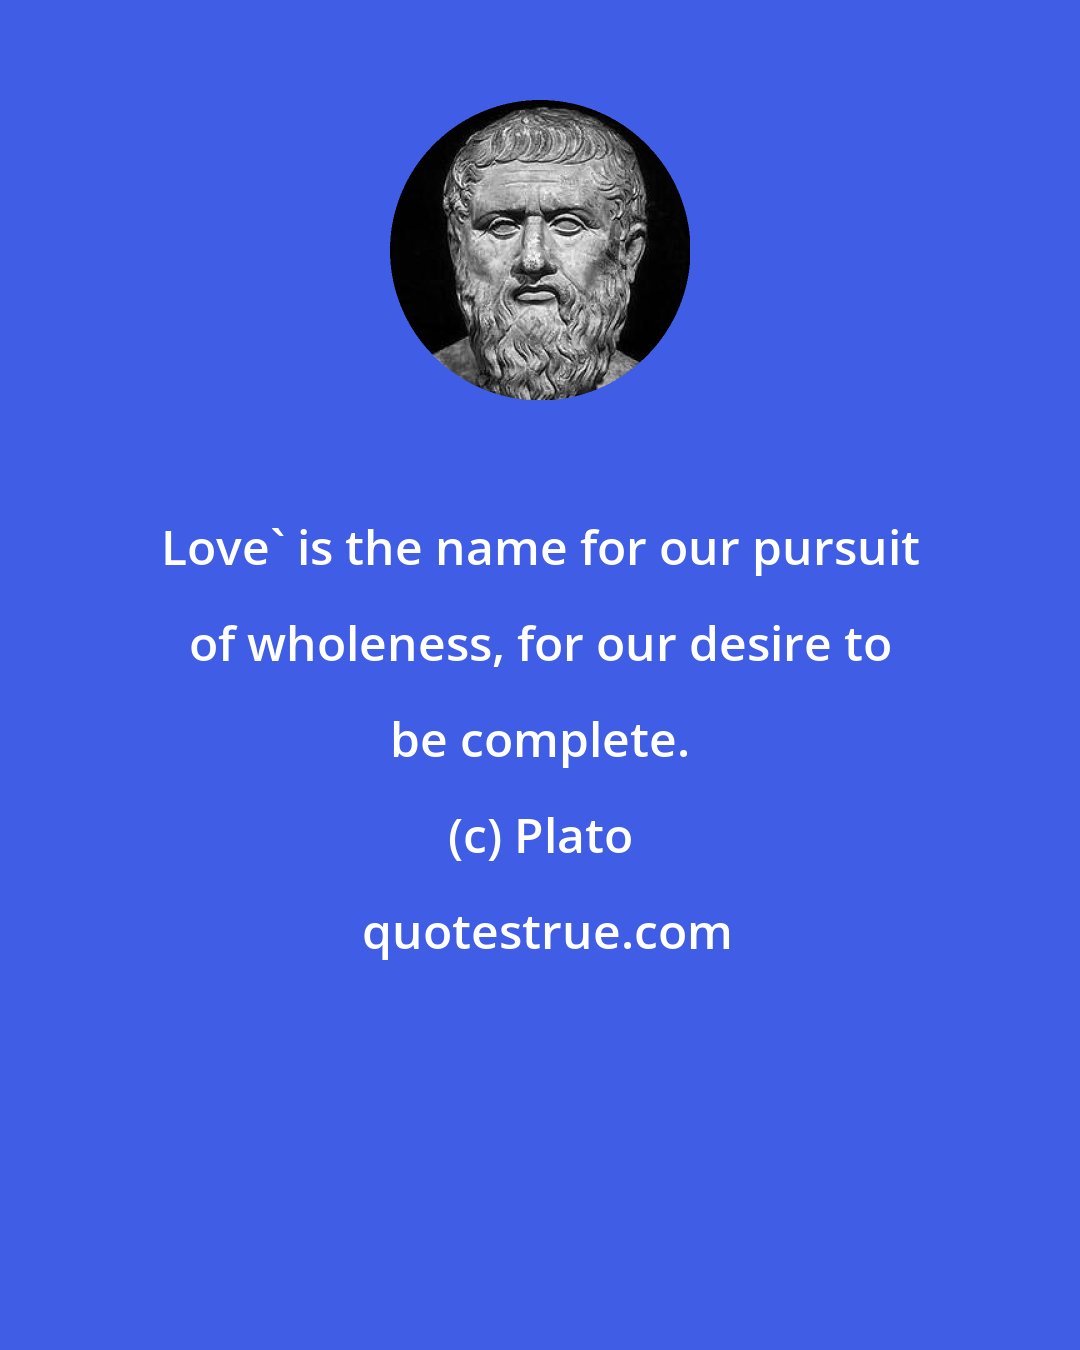 Plato: Love' is the name for our pursuit of wholeness, for our desire to be complete.